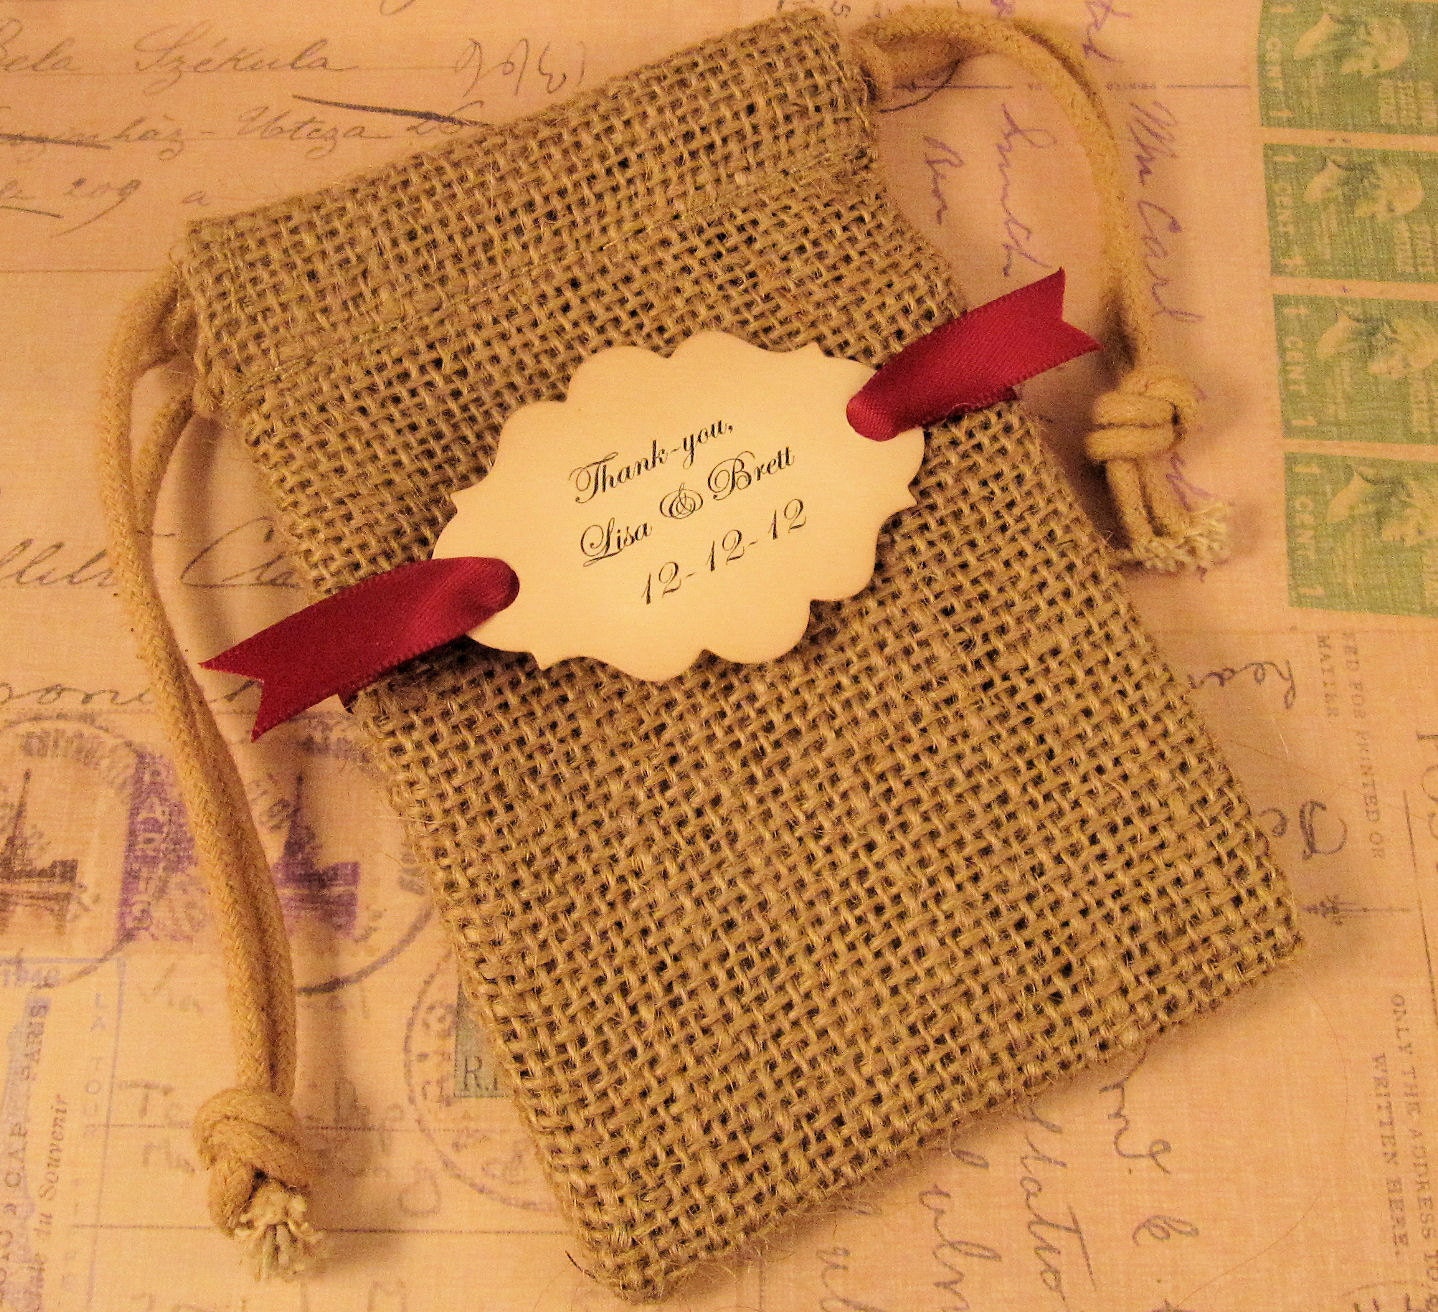 For unique wedding favors use our burlap bags to package aromatic whole 